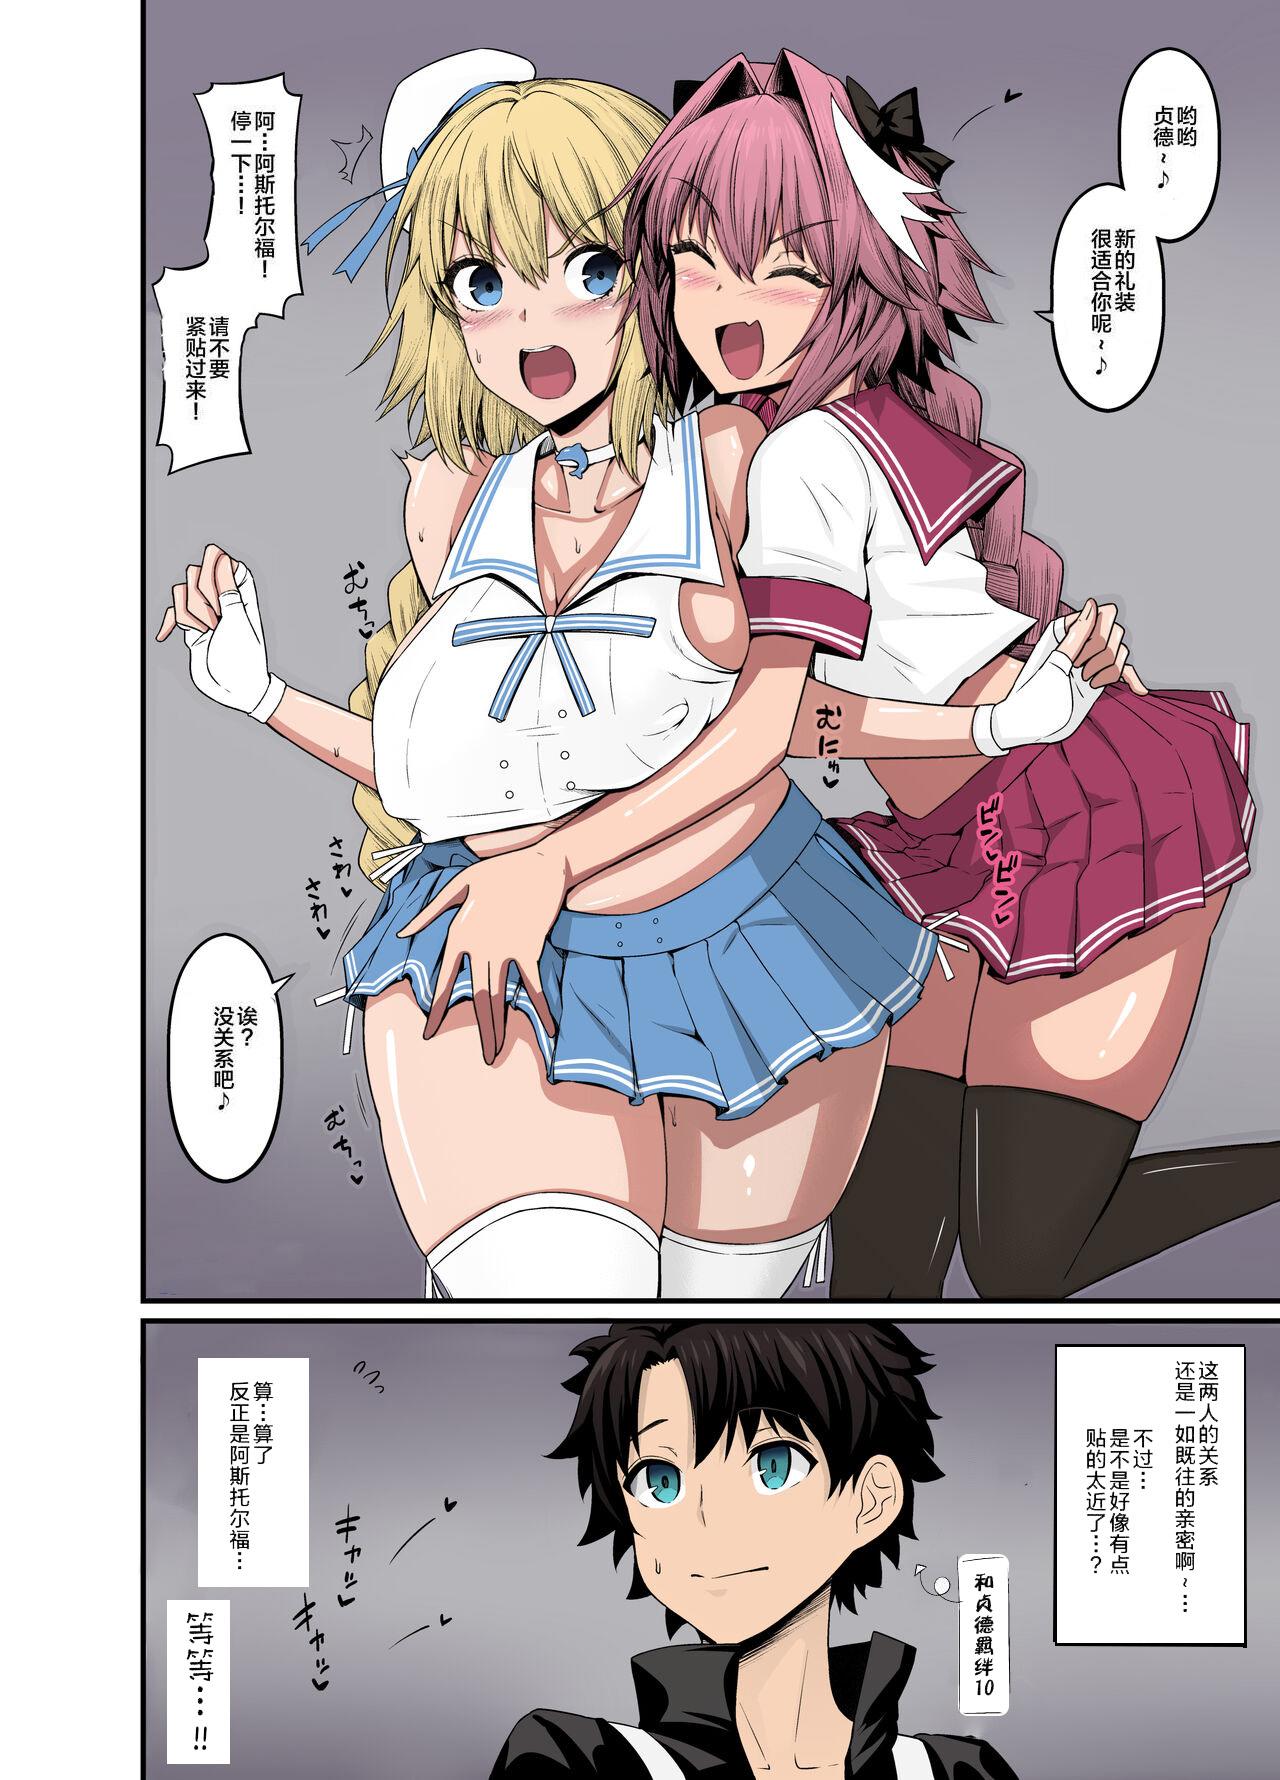 Riding Cock [Ankoman] Astolfo，Jeanne to Nakayoku suru (Fate/Grand Order)][Chinese] - Fate grand order Sister - Picture 1